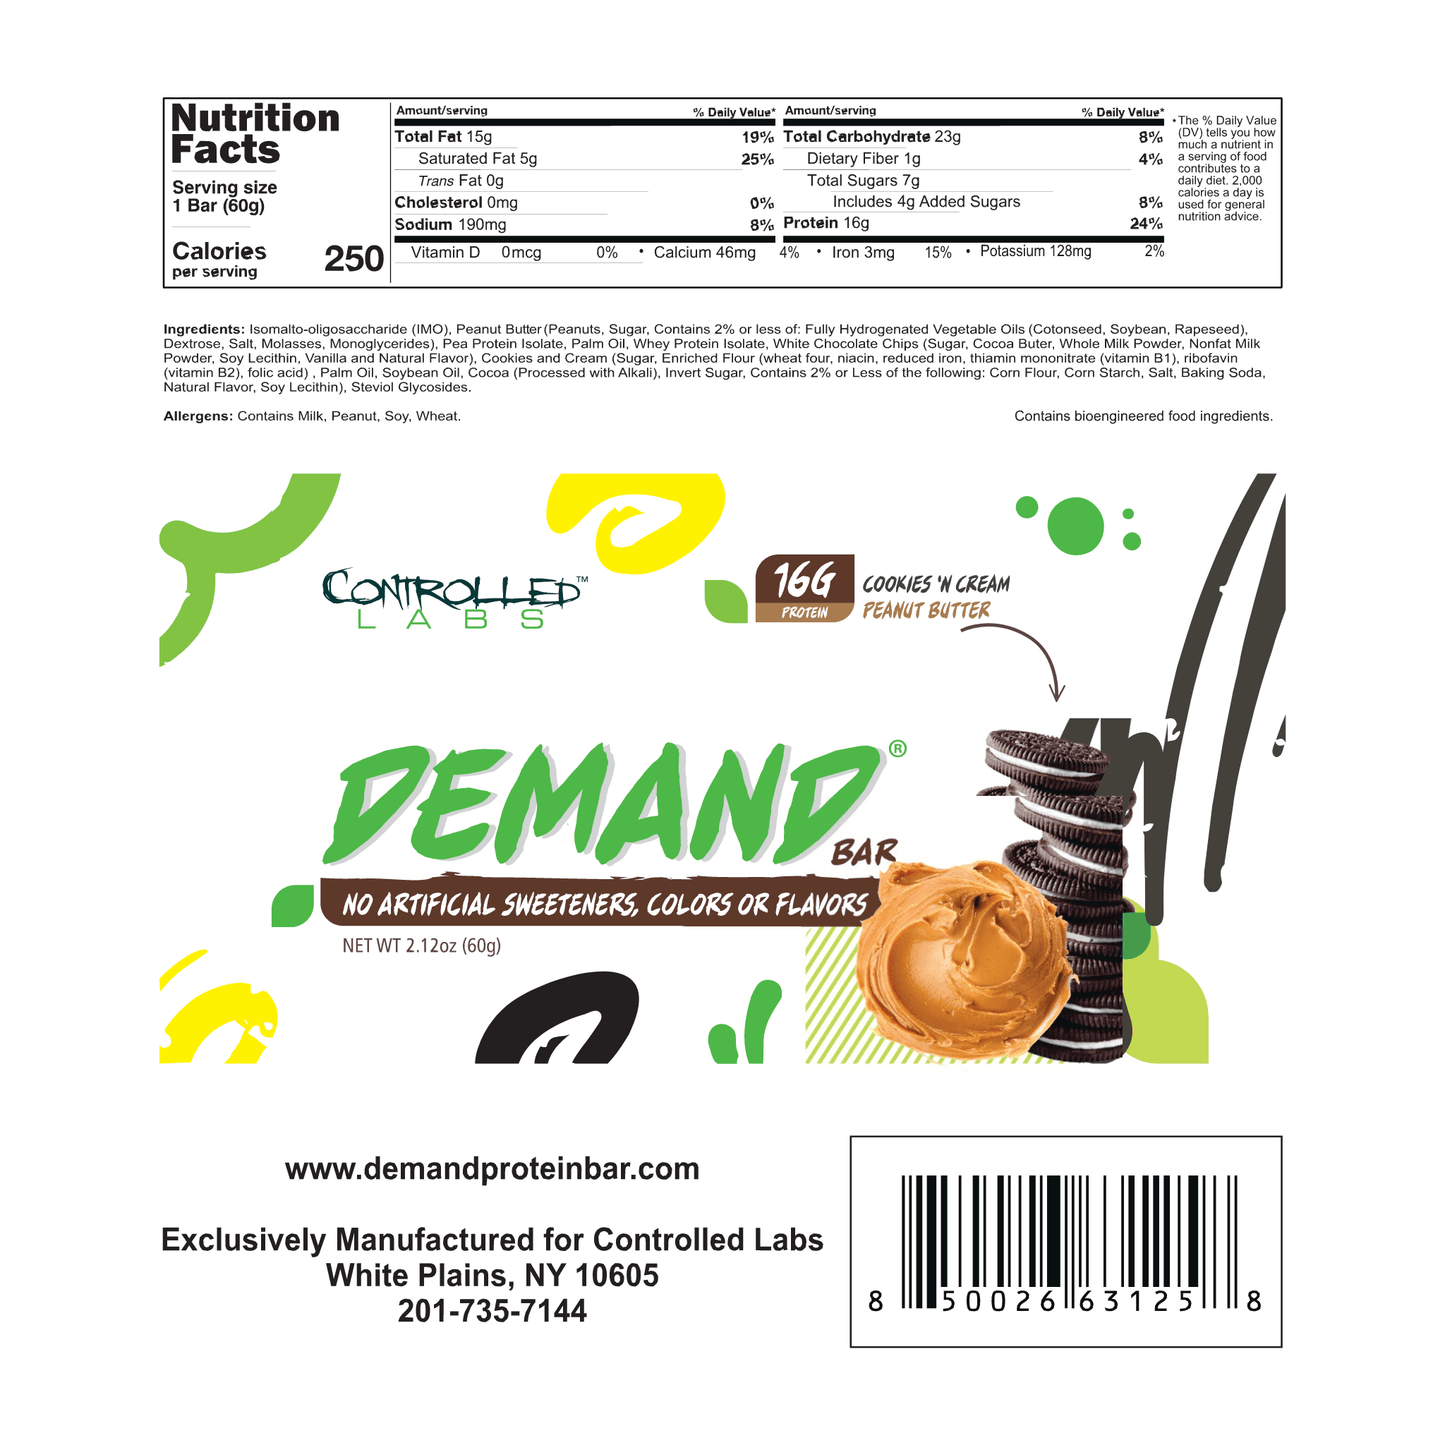 Controlled Labs Demand Protein Bar Cookie 'n' Cream Peanut Butter Nutrition Facts